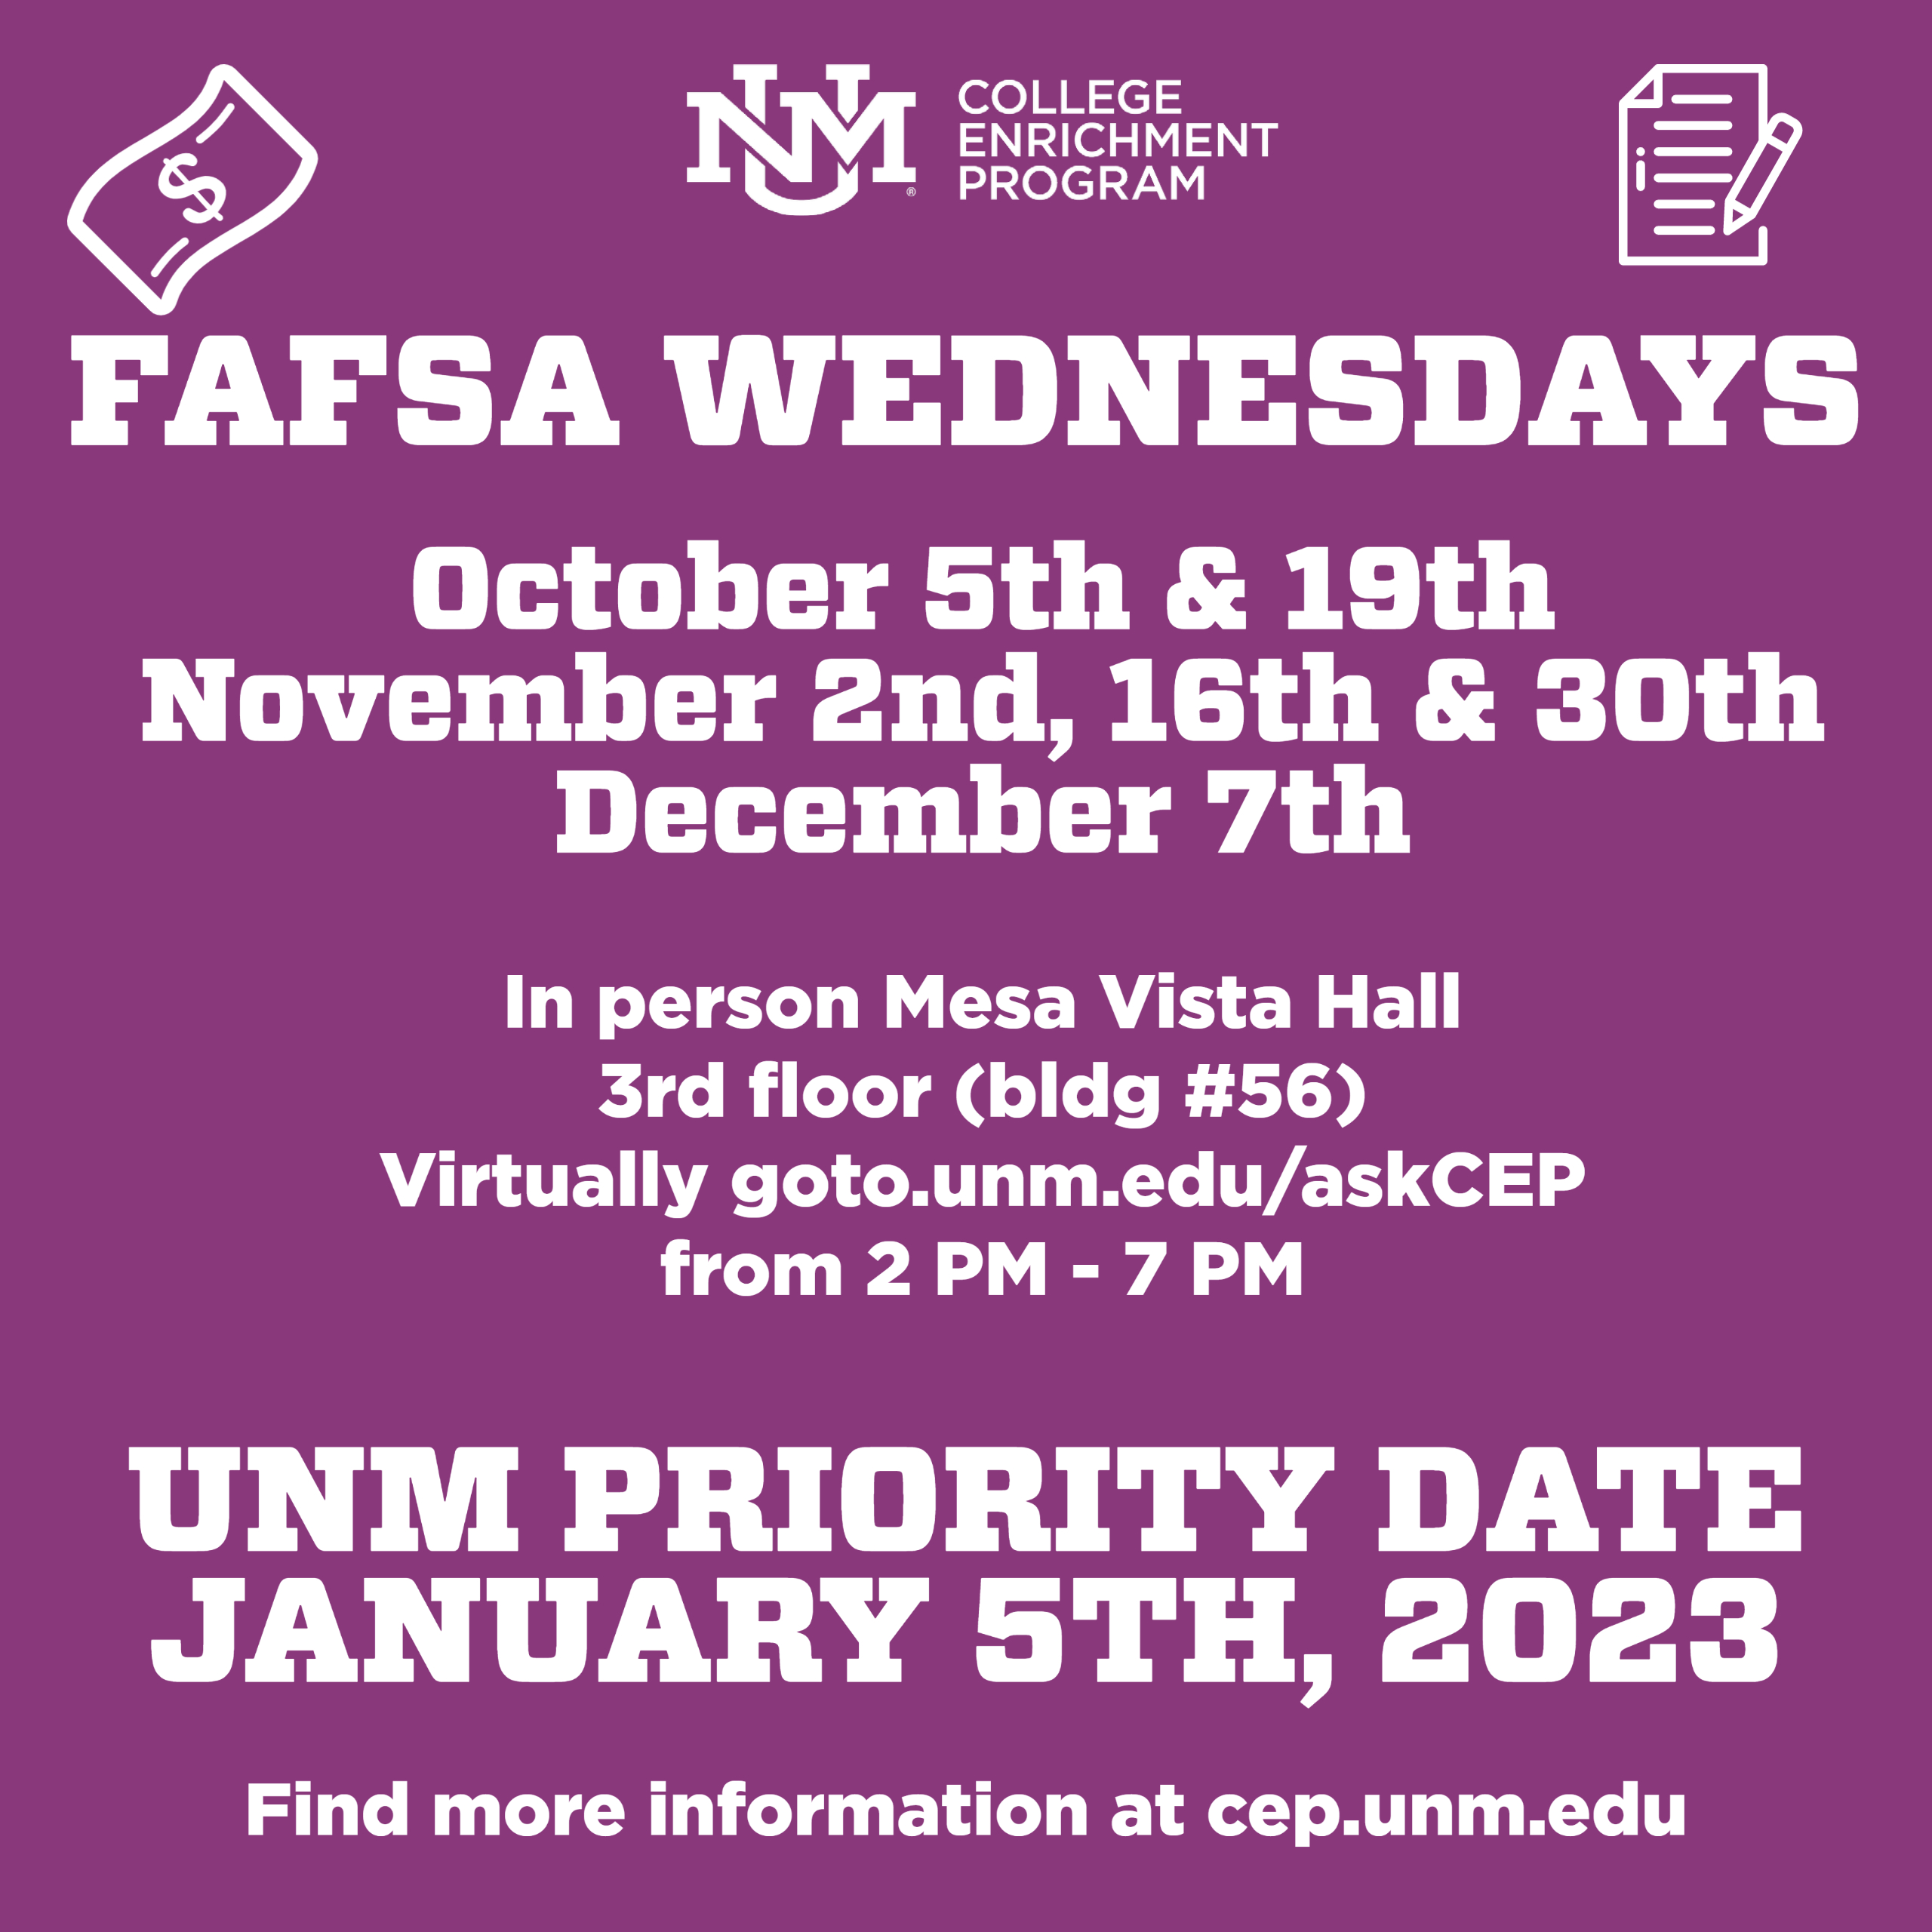 fafsa-wednesdays flyer. Happening every wednesday starting October 5th